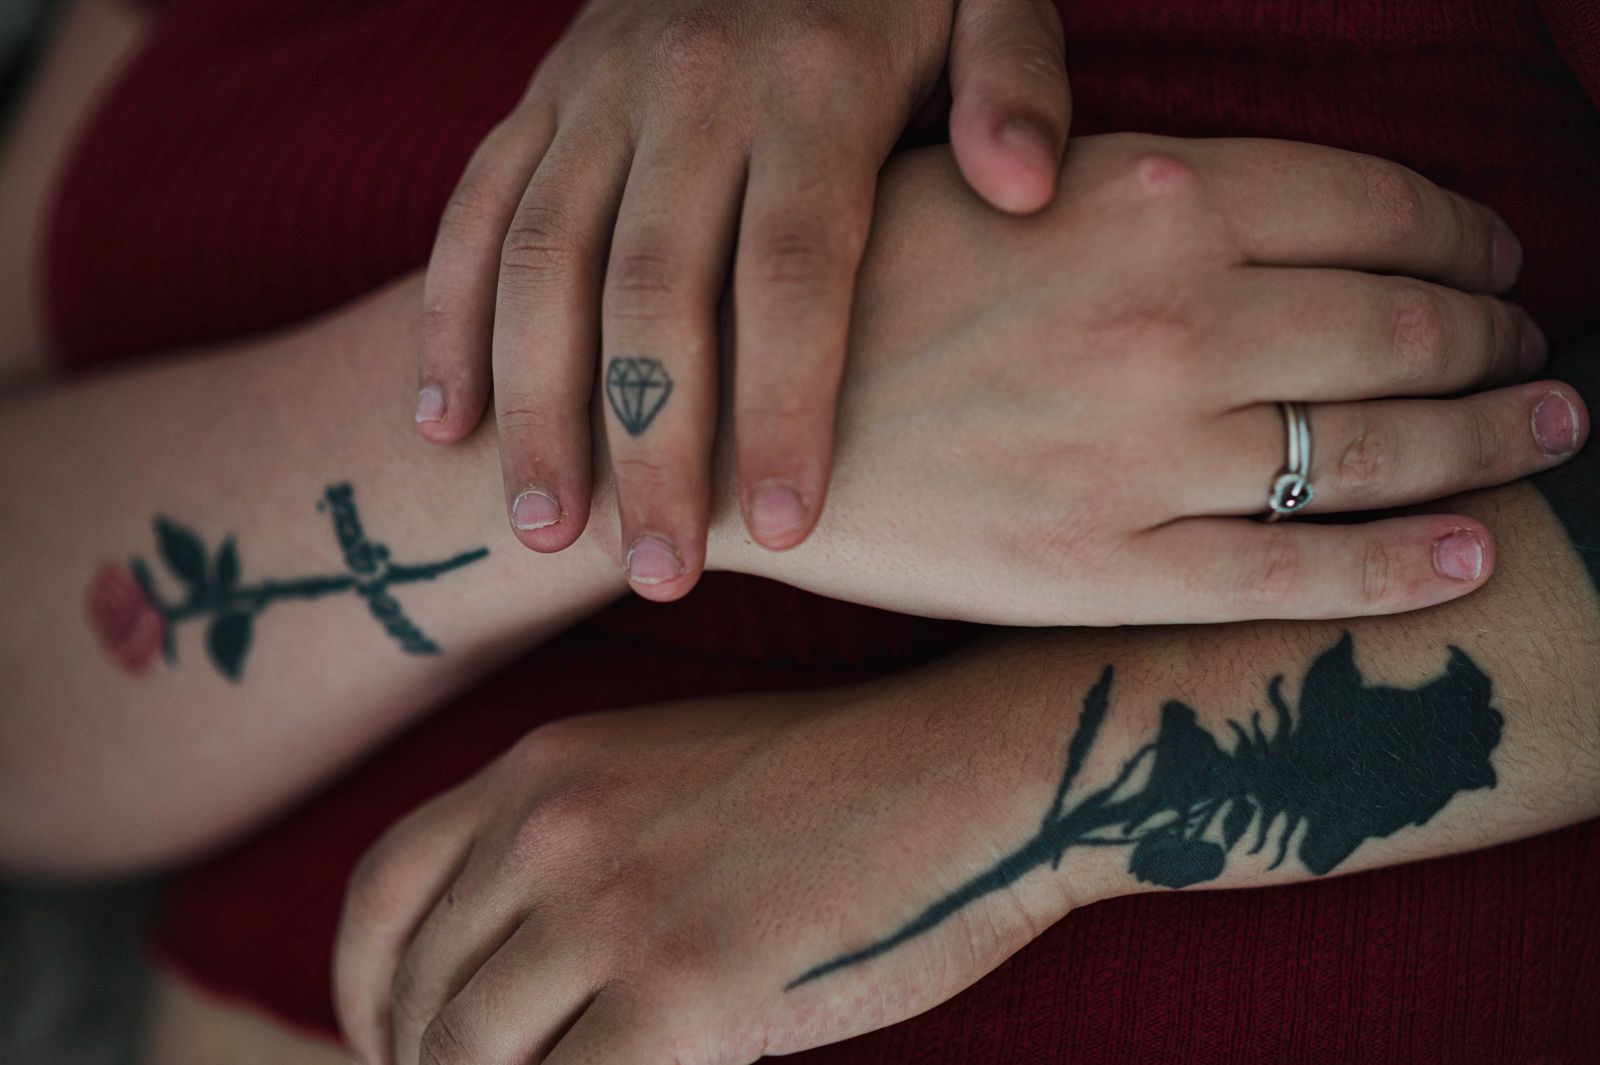 © Diana Bagnoli - Salvatore and Viviana's hands. They both tattooed a rose on their arm to reaffirm their love.